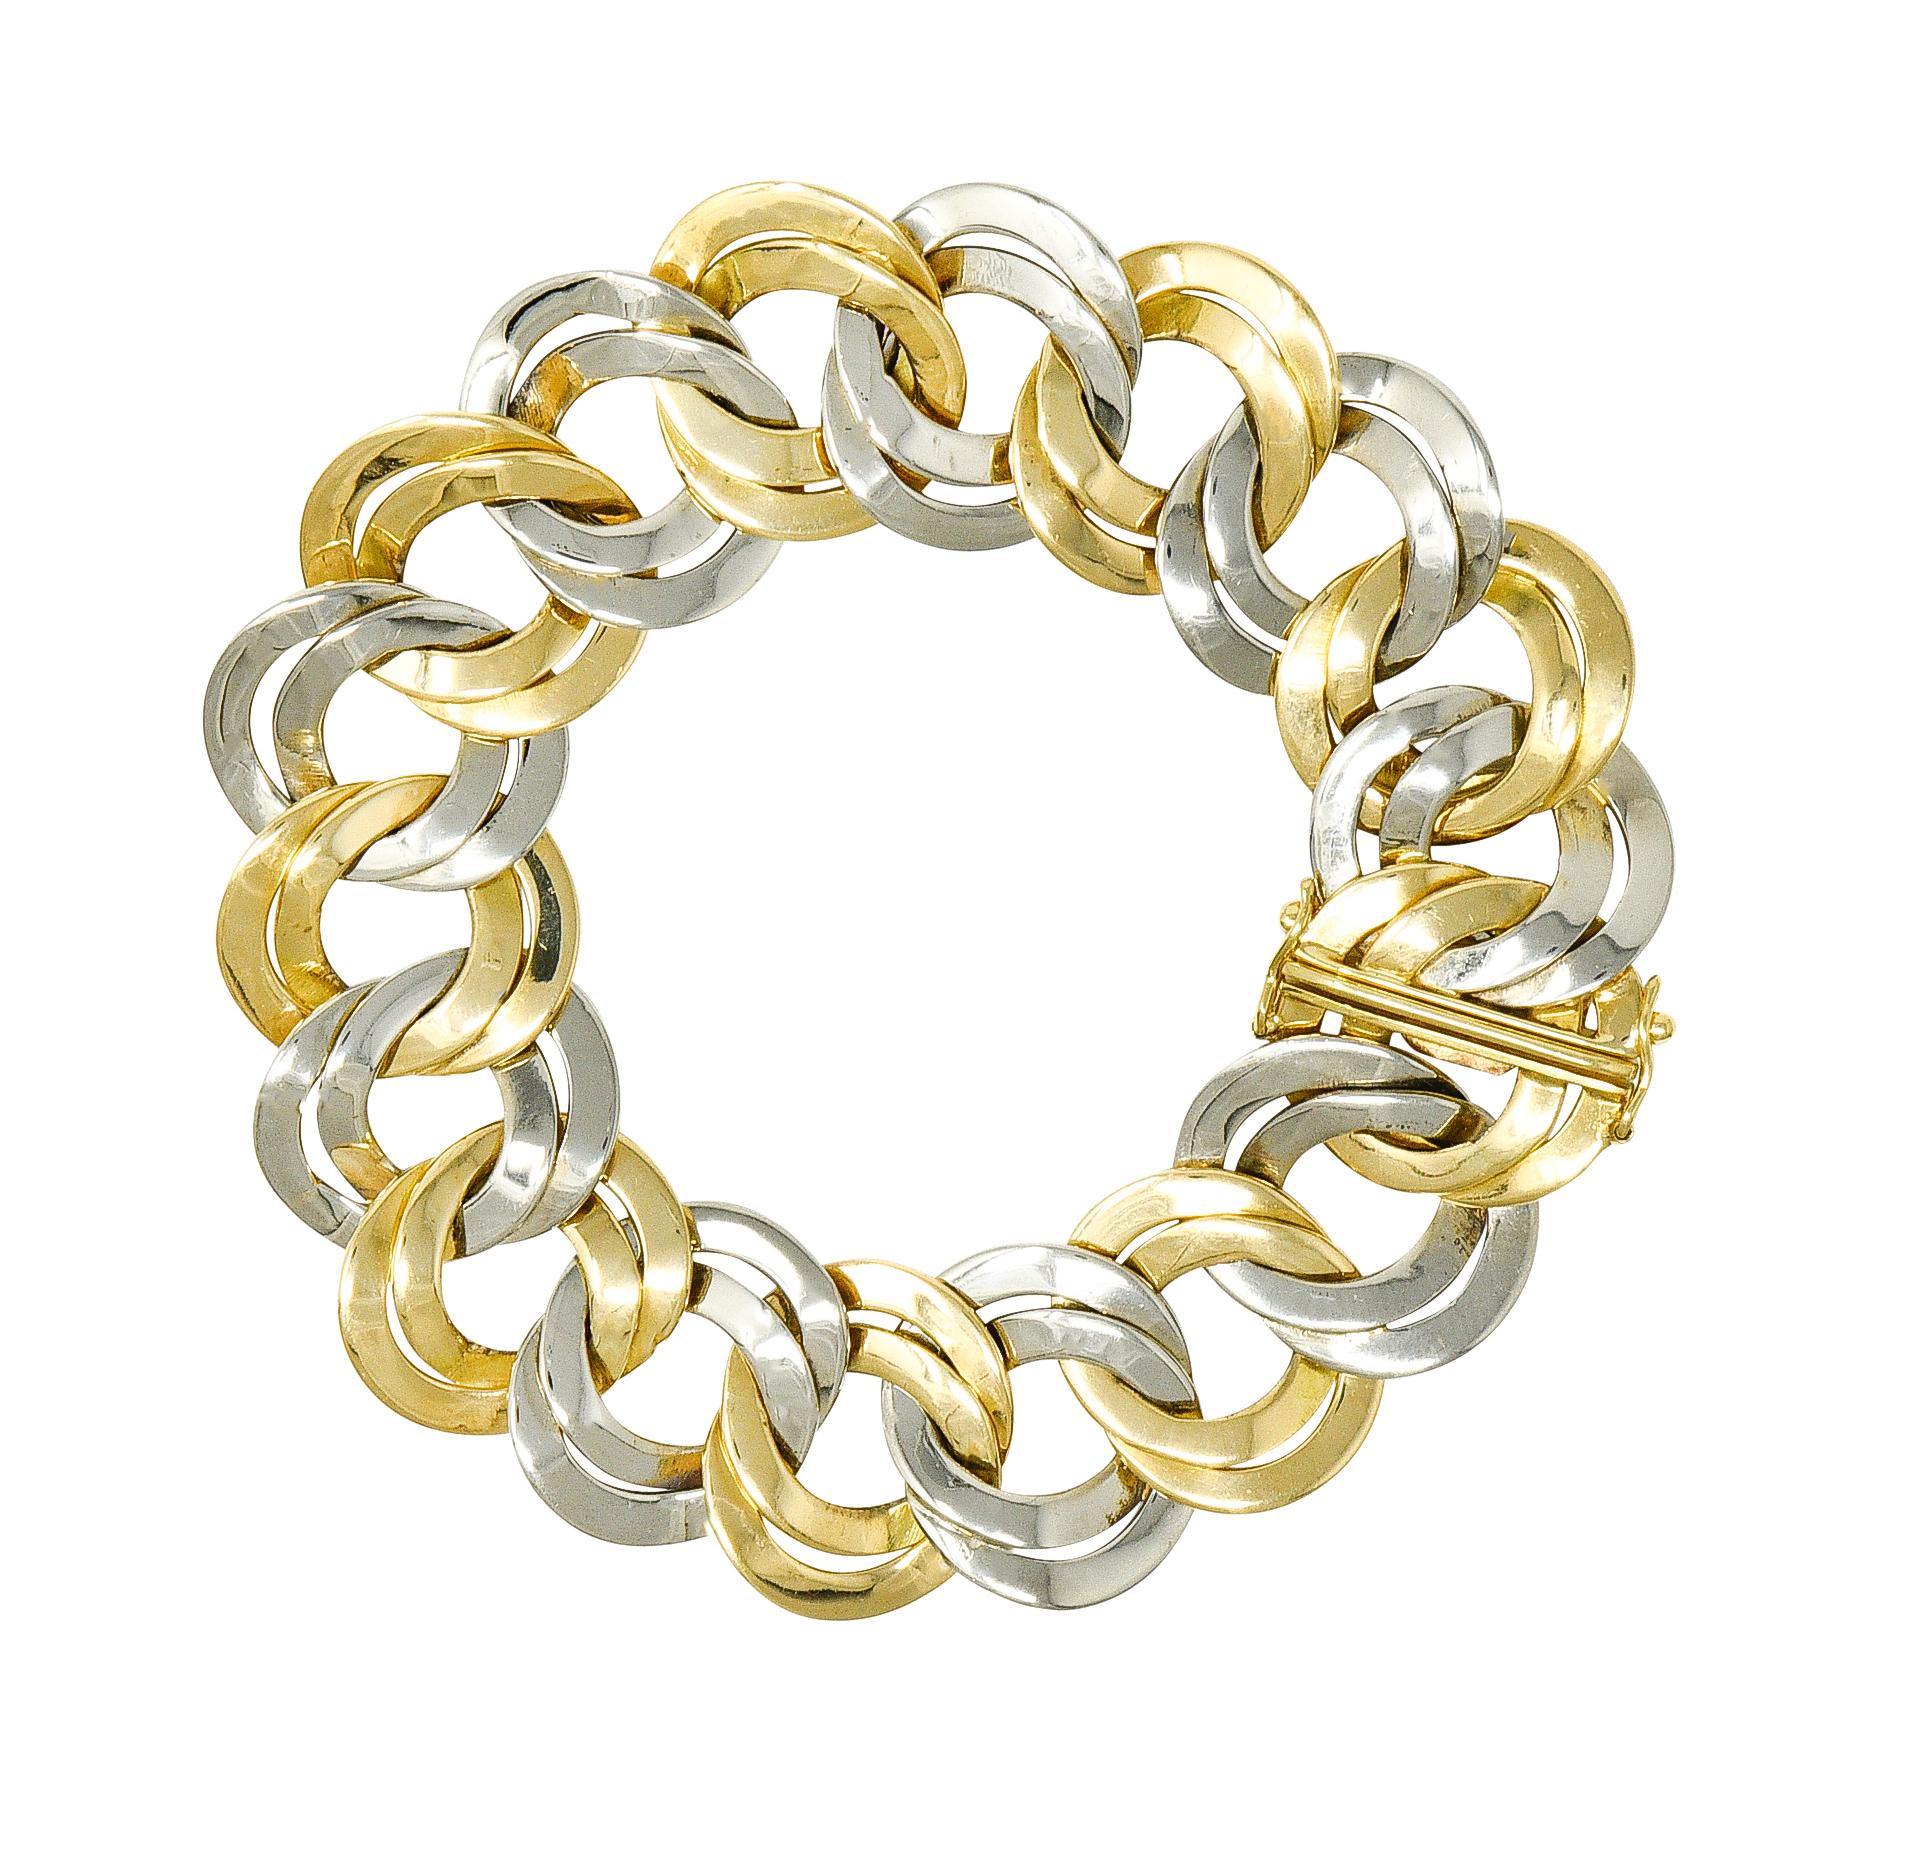 Designed as a curb link bracelet with doubled round links. Alternating between yellow gold and platinum. Accented by high polished finish. Completed by hidden clasp closure with double hinged safety. Tested as 18 karat gold and platinum. Numbered